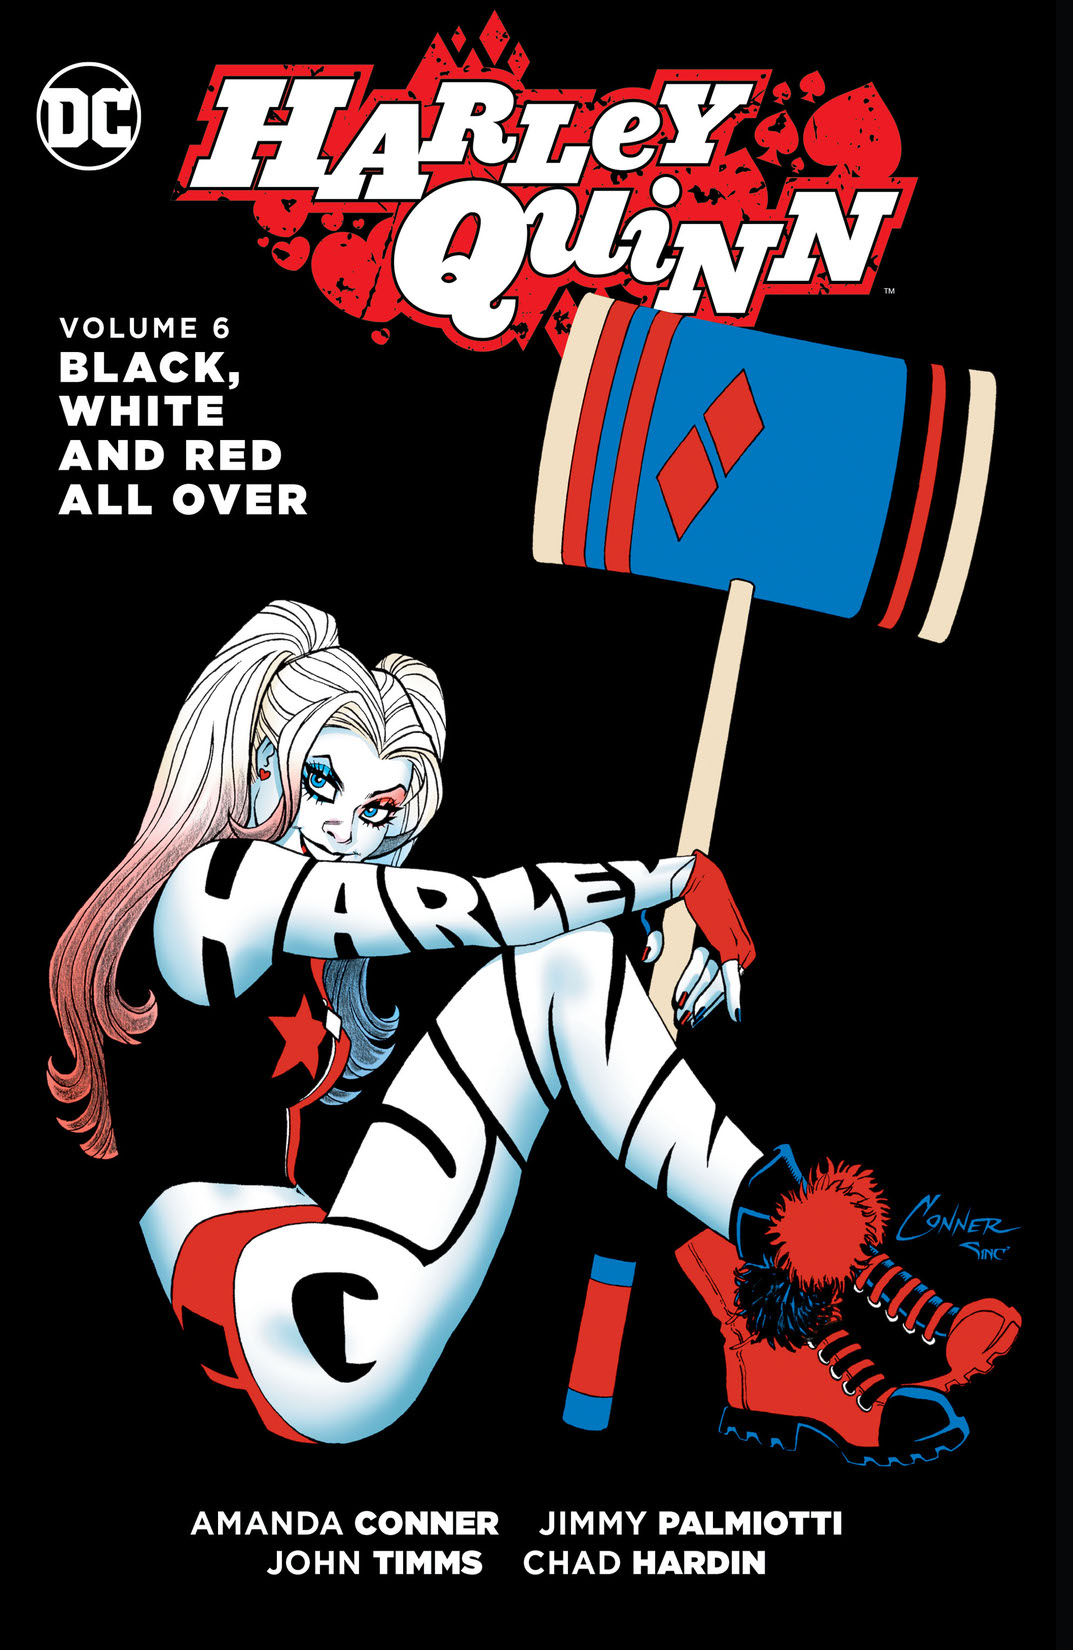 Harley Quinn Vol. 6: Black, White and Red All Over preview images